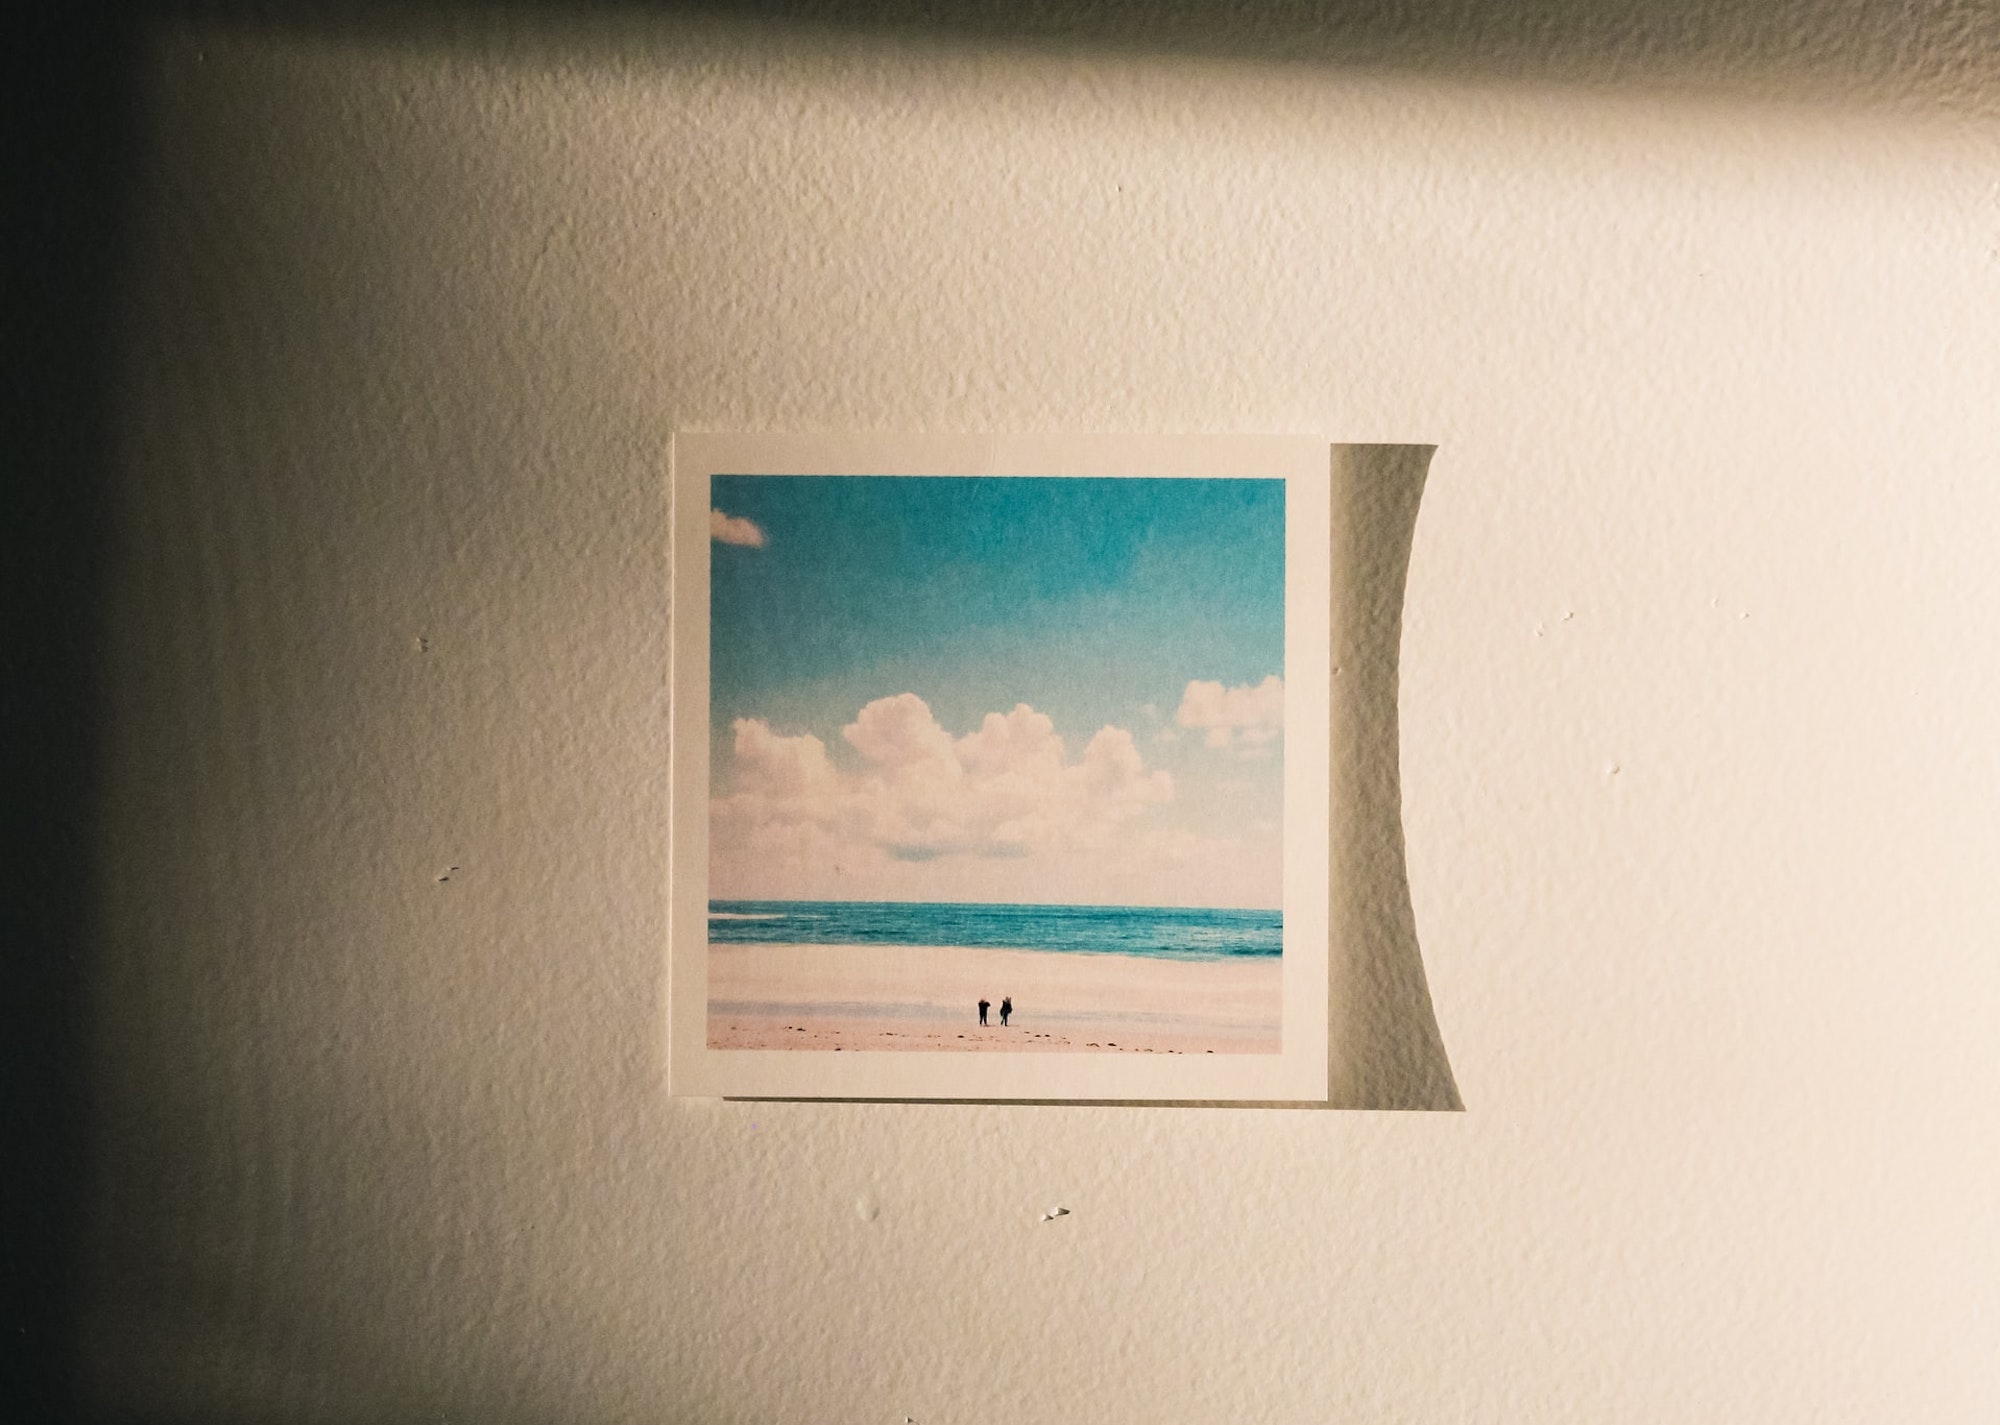 Polaroid instant film photo of people at the beach on a sunny wall to represent memories stored in the brain